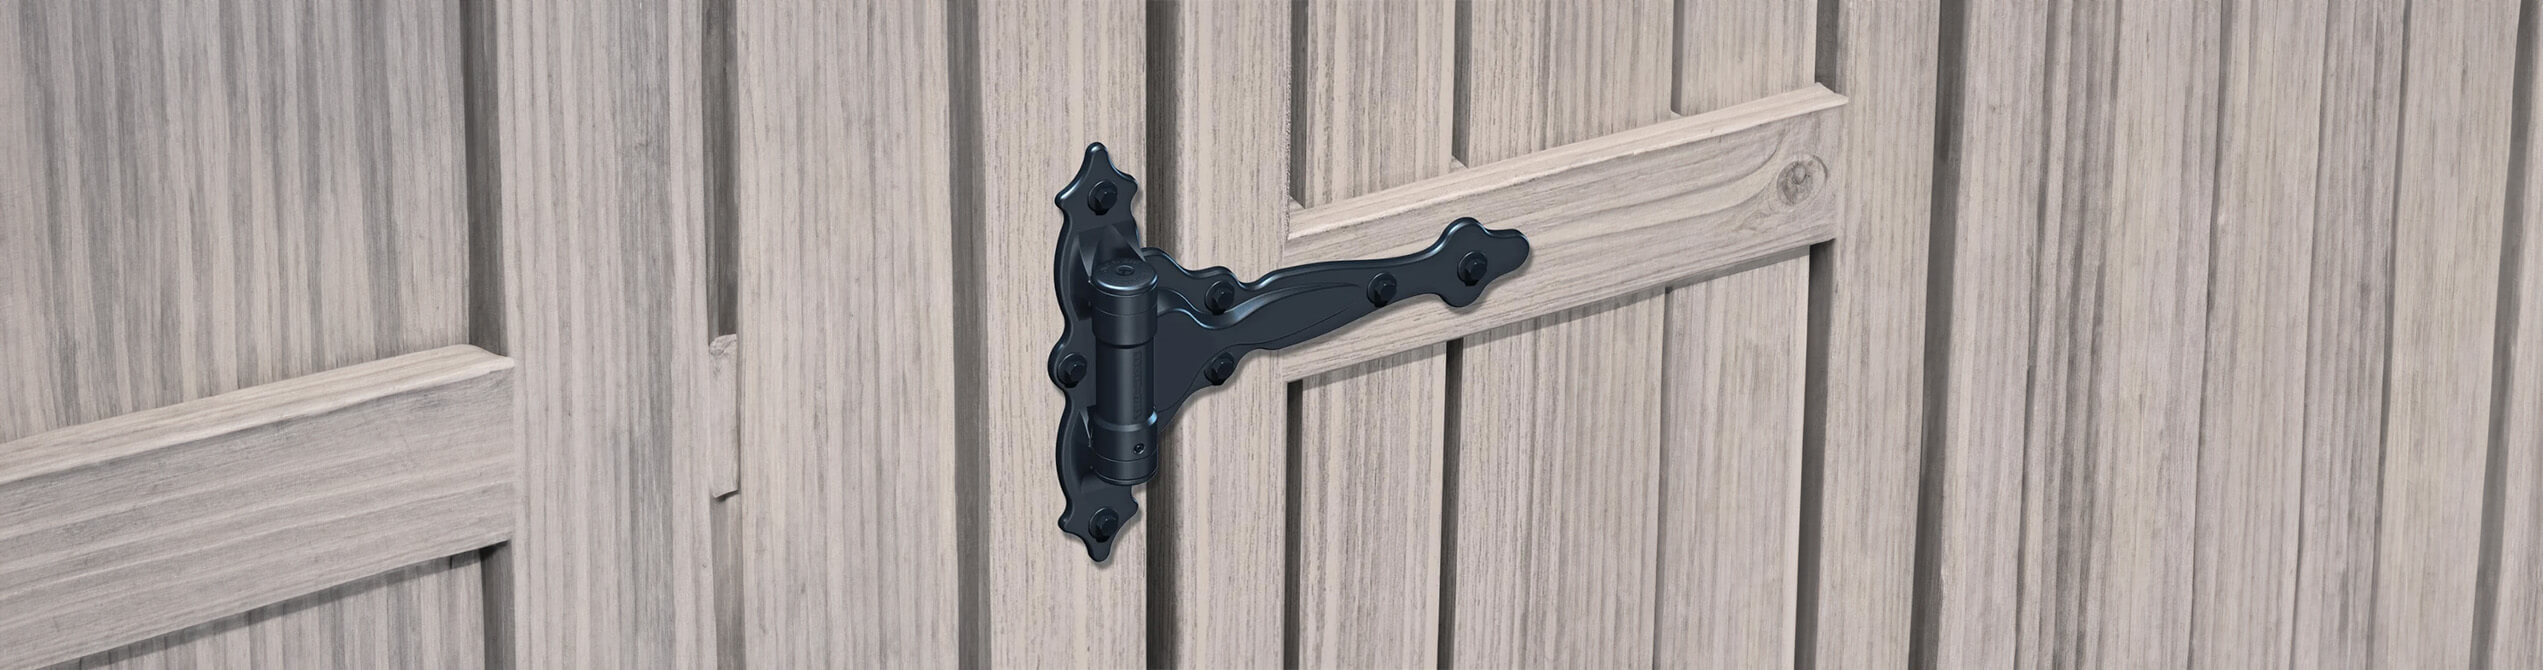 Get in touch with our hinges wholesale team